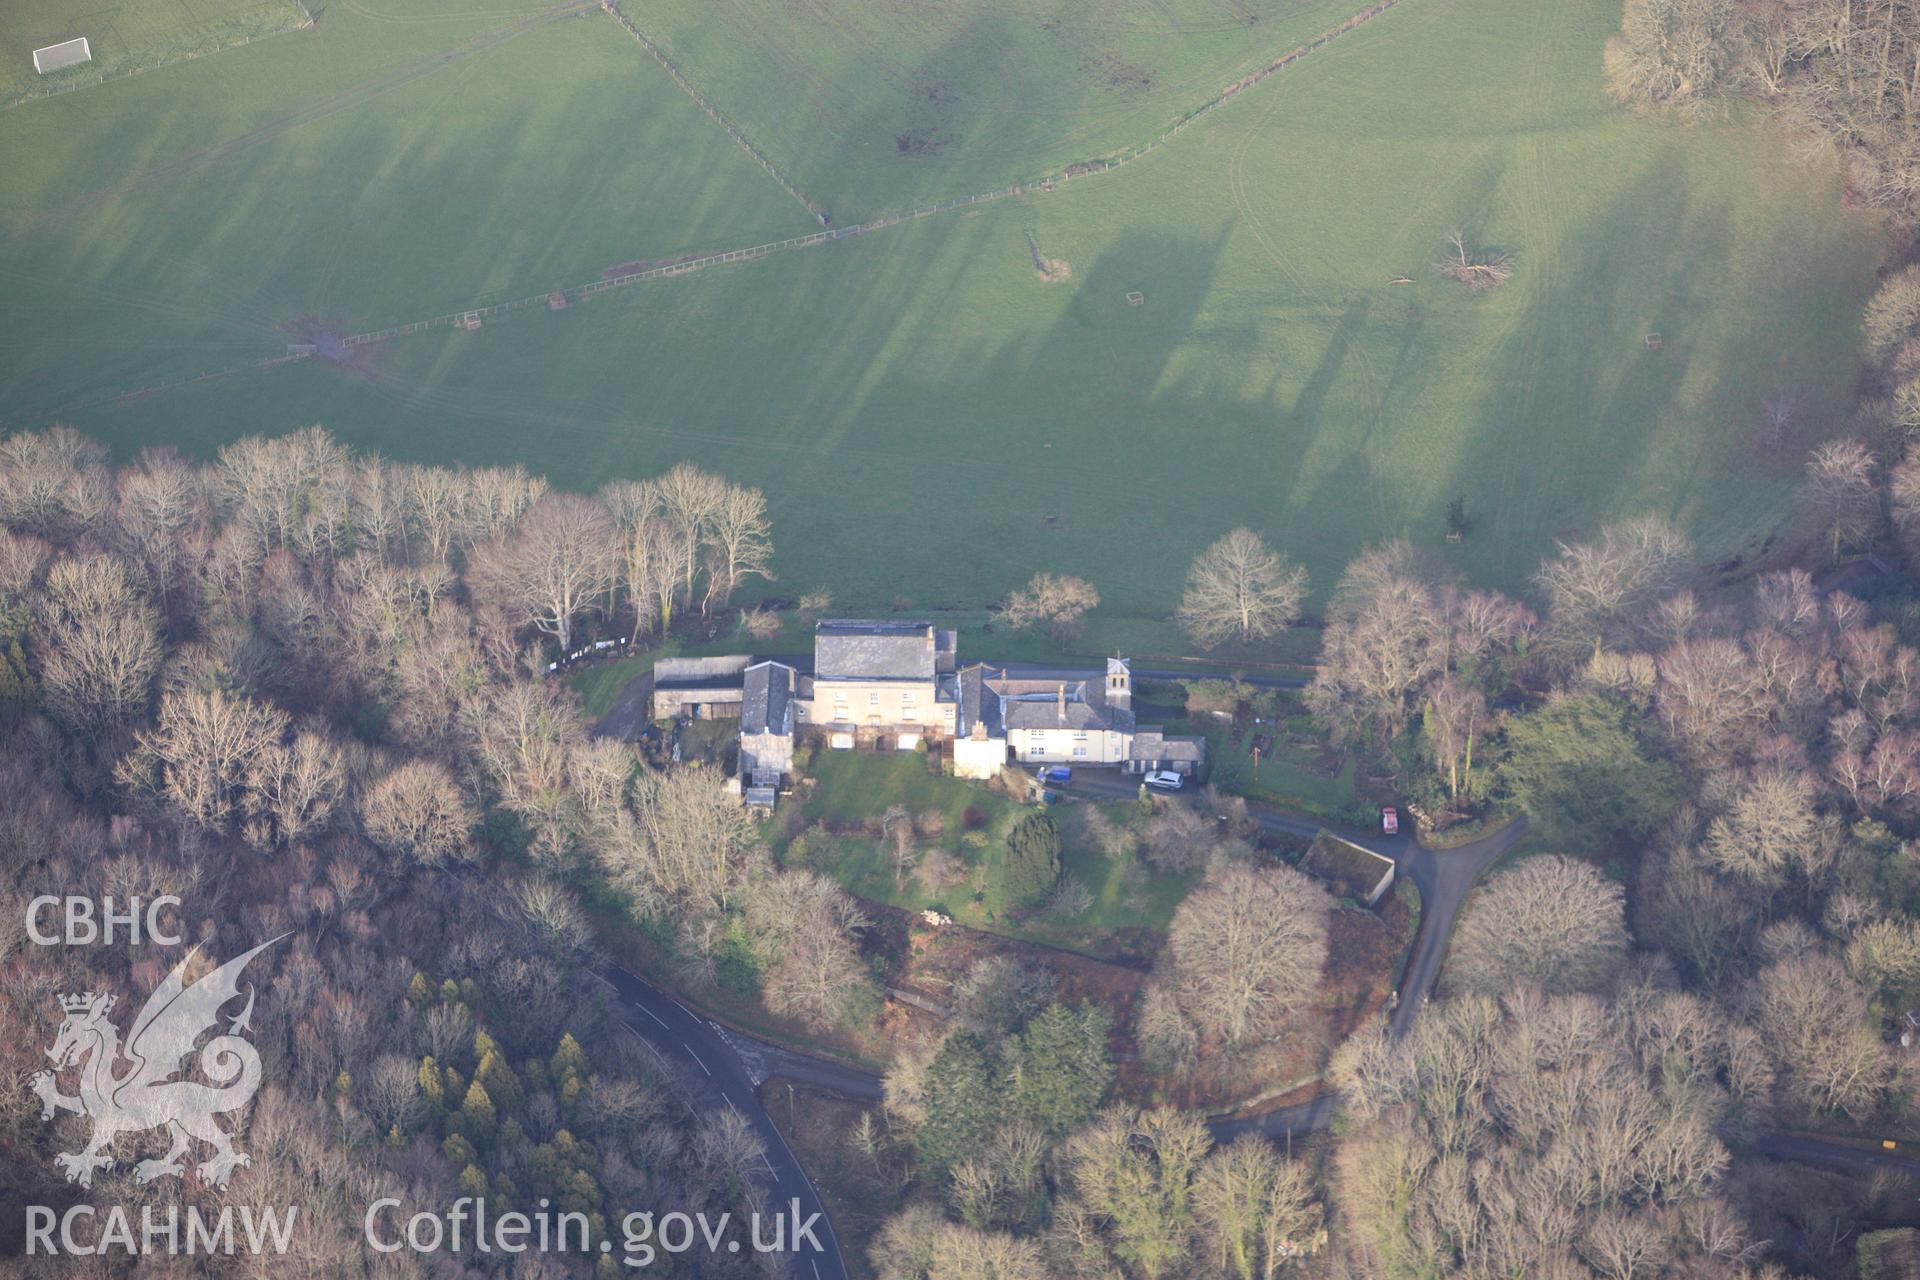 RCAHMW colour oblique photograph of Castle Hill House, Llanilar. Taken by Toby Driver on 07/02/2012.